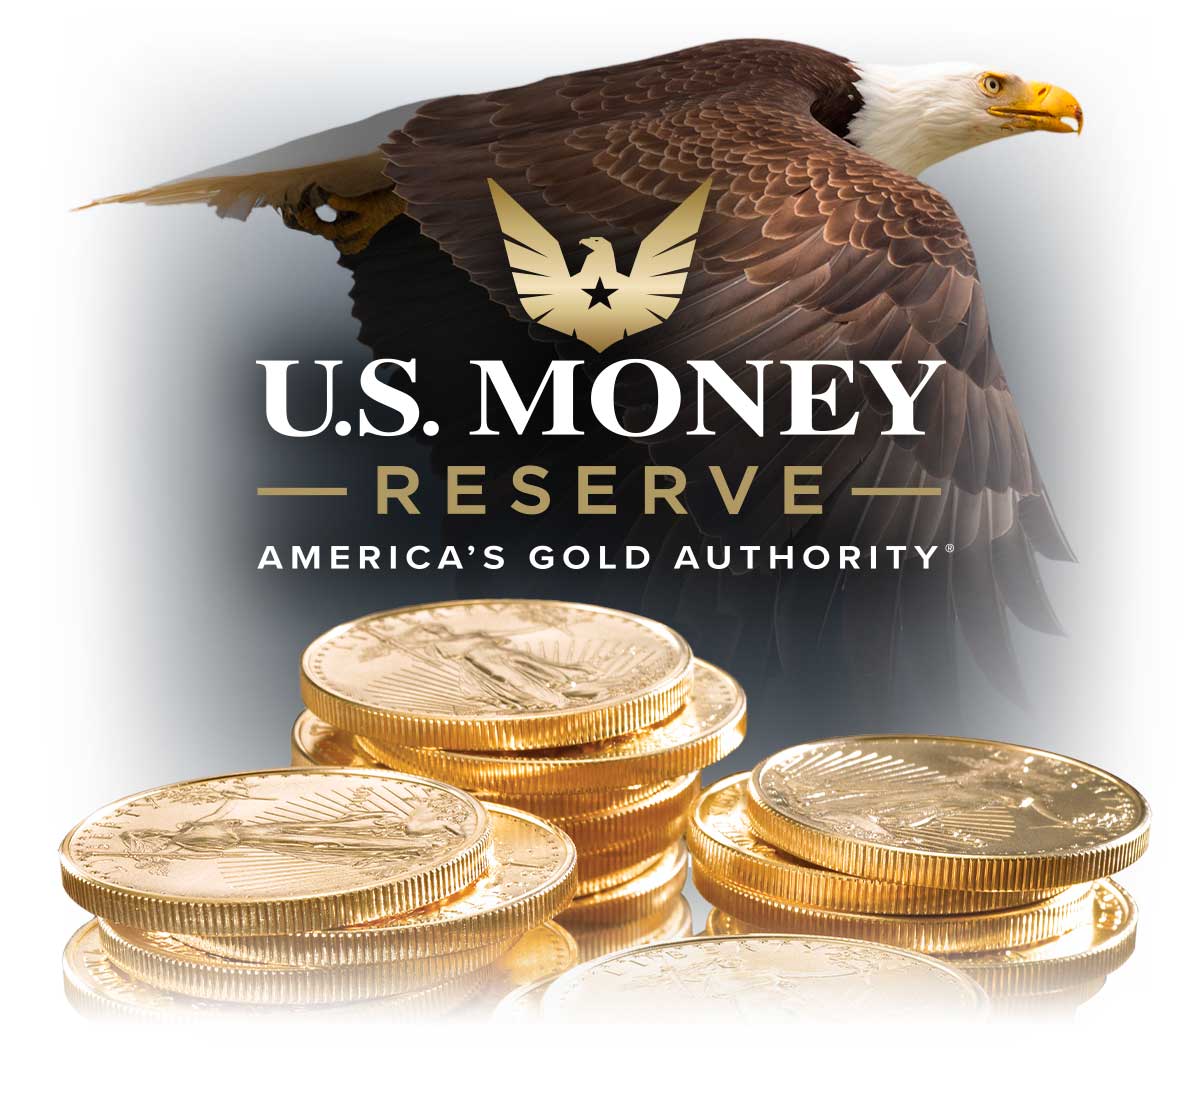 U.S. Money Reserve logo with a flying bald eagle and stacks of gold coins in the foreground